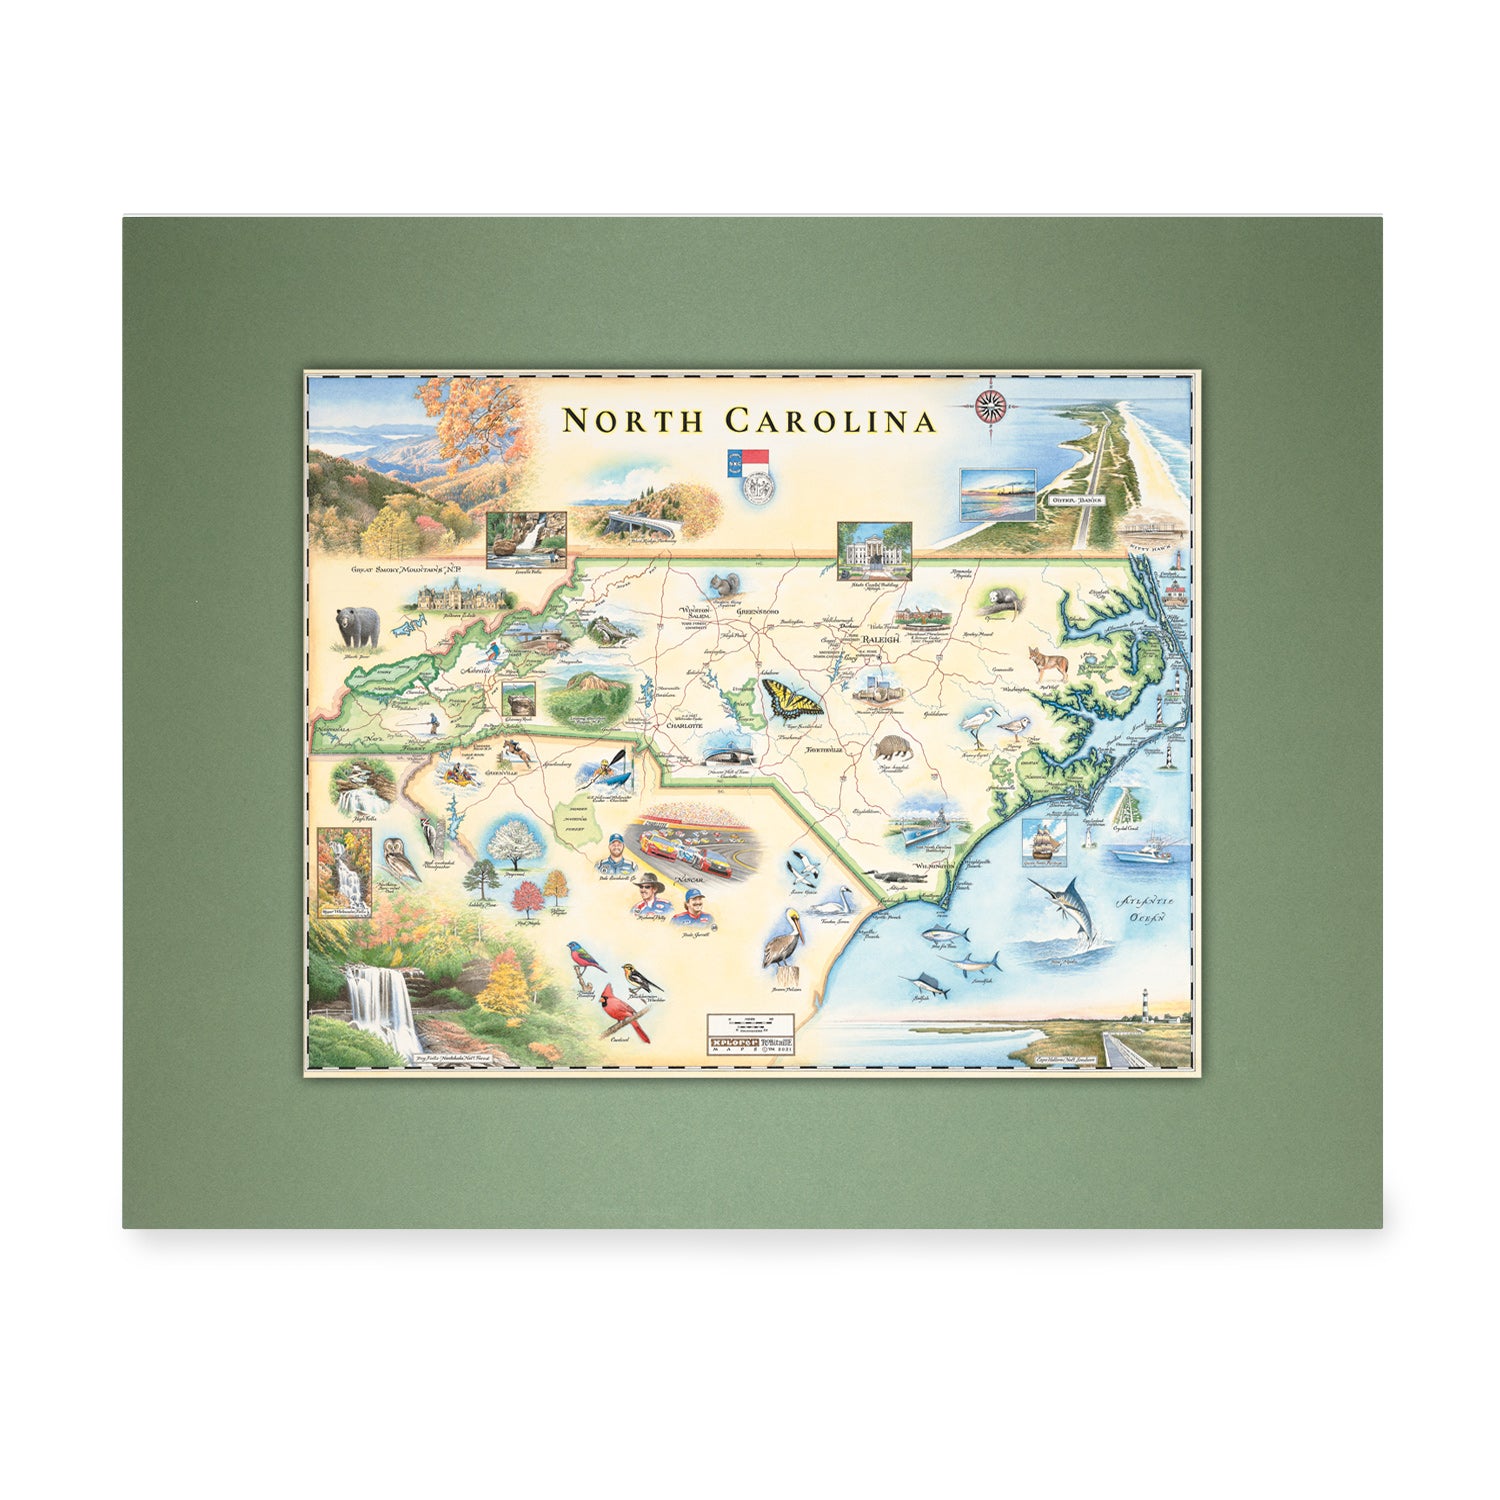 North Carolina State Mini-Map by Xplorer Maps. The map features Dry Falls in the Nantahala National Forest, the Outer Banks, a Nascar Hall of Fame, and the USS North Carolina on the coast. 